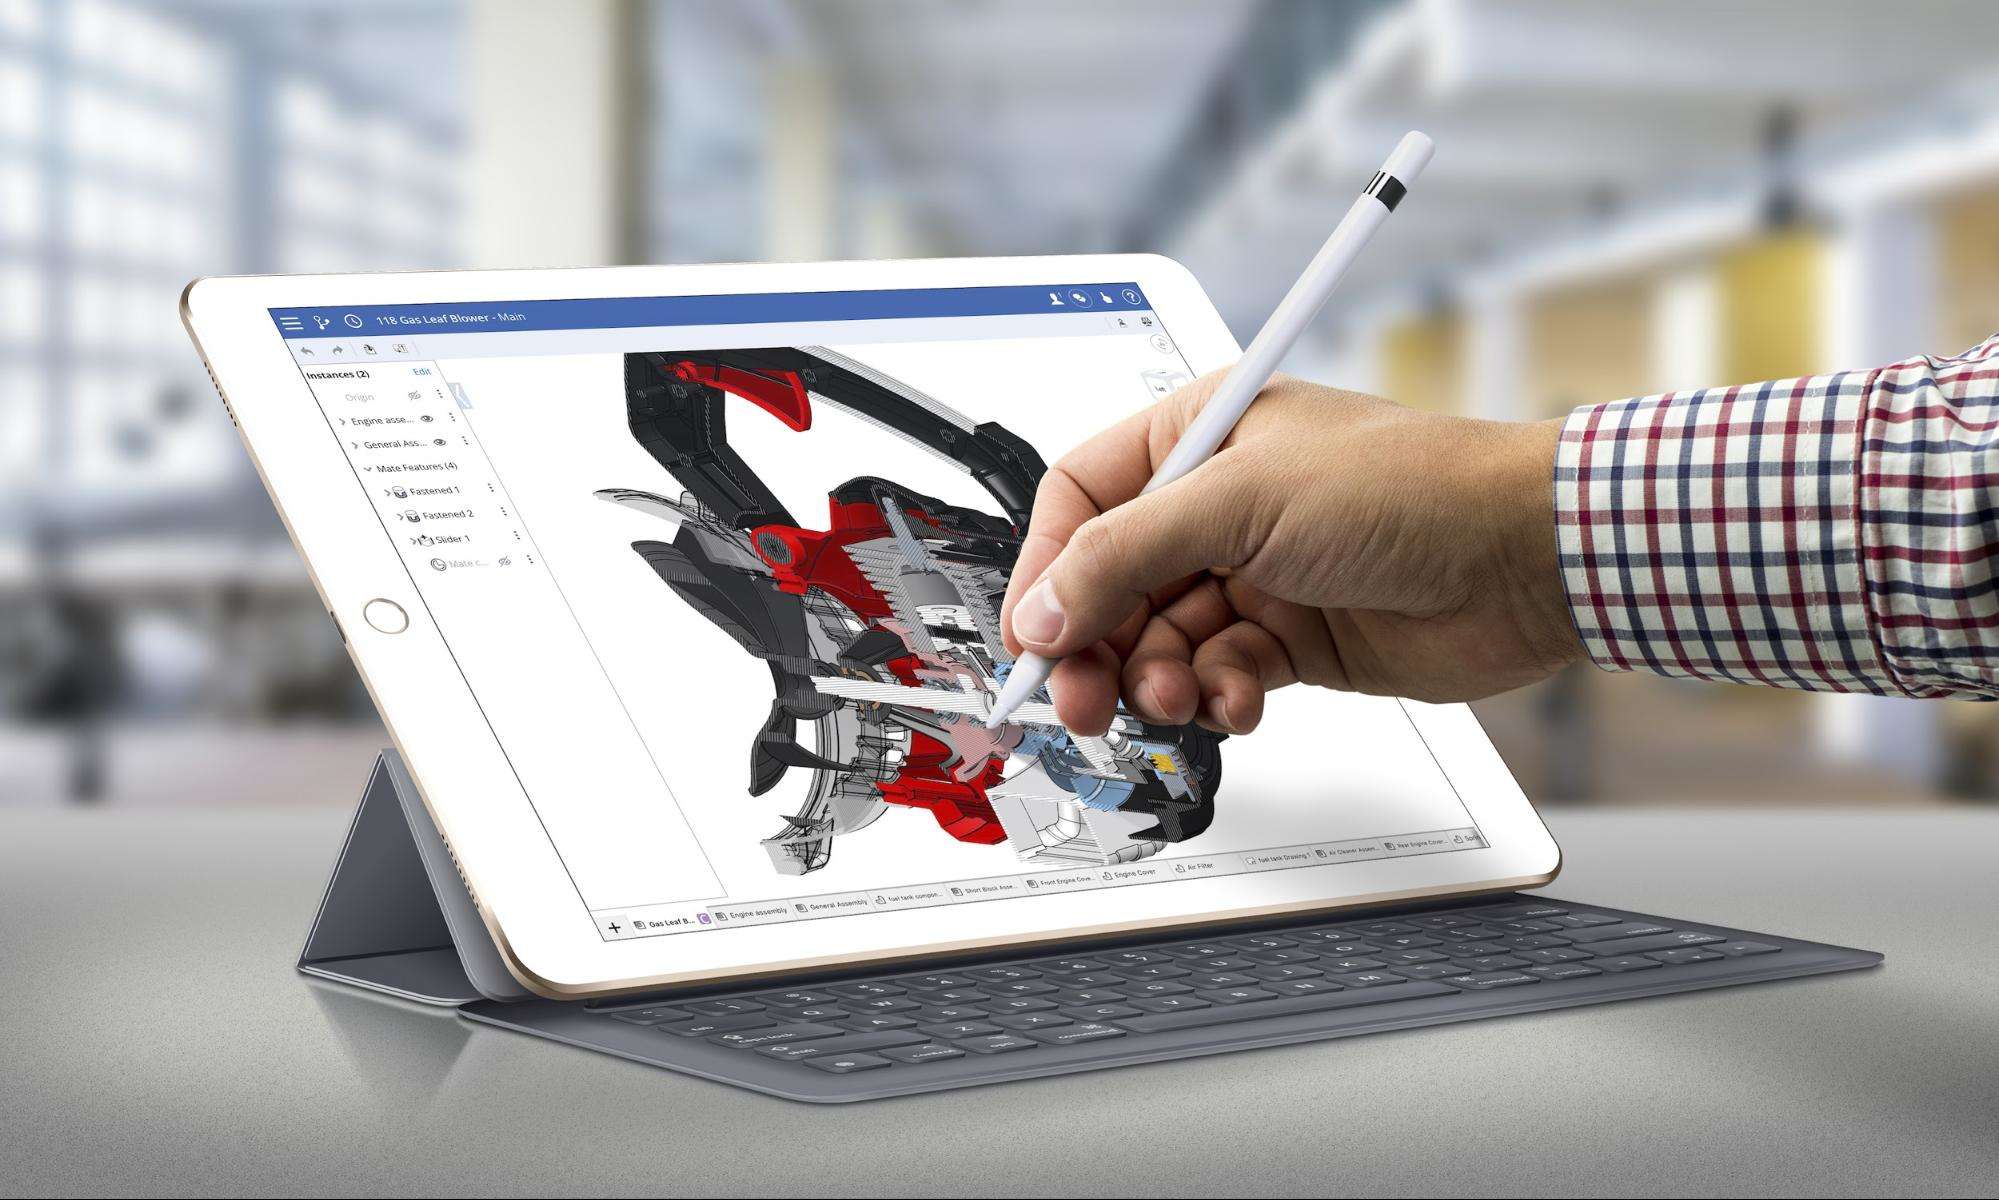 Create detailed 3D models with this amazing CAD app for iPad Pro.